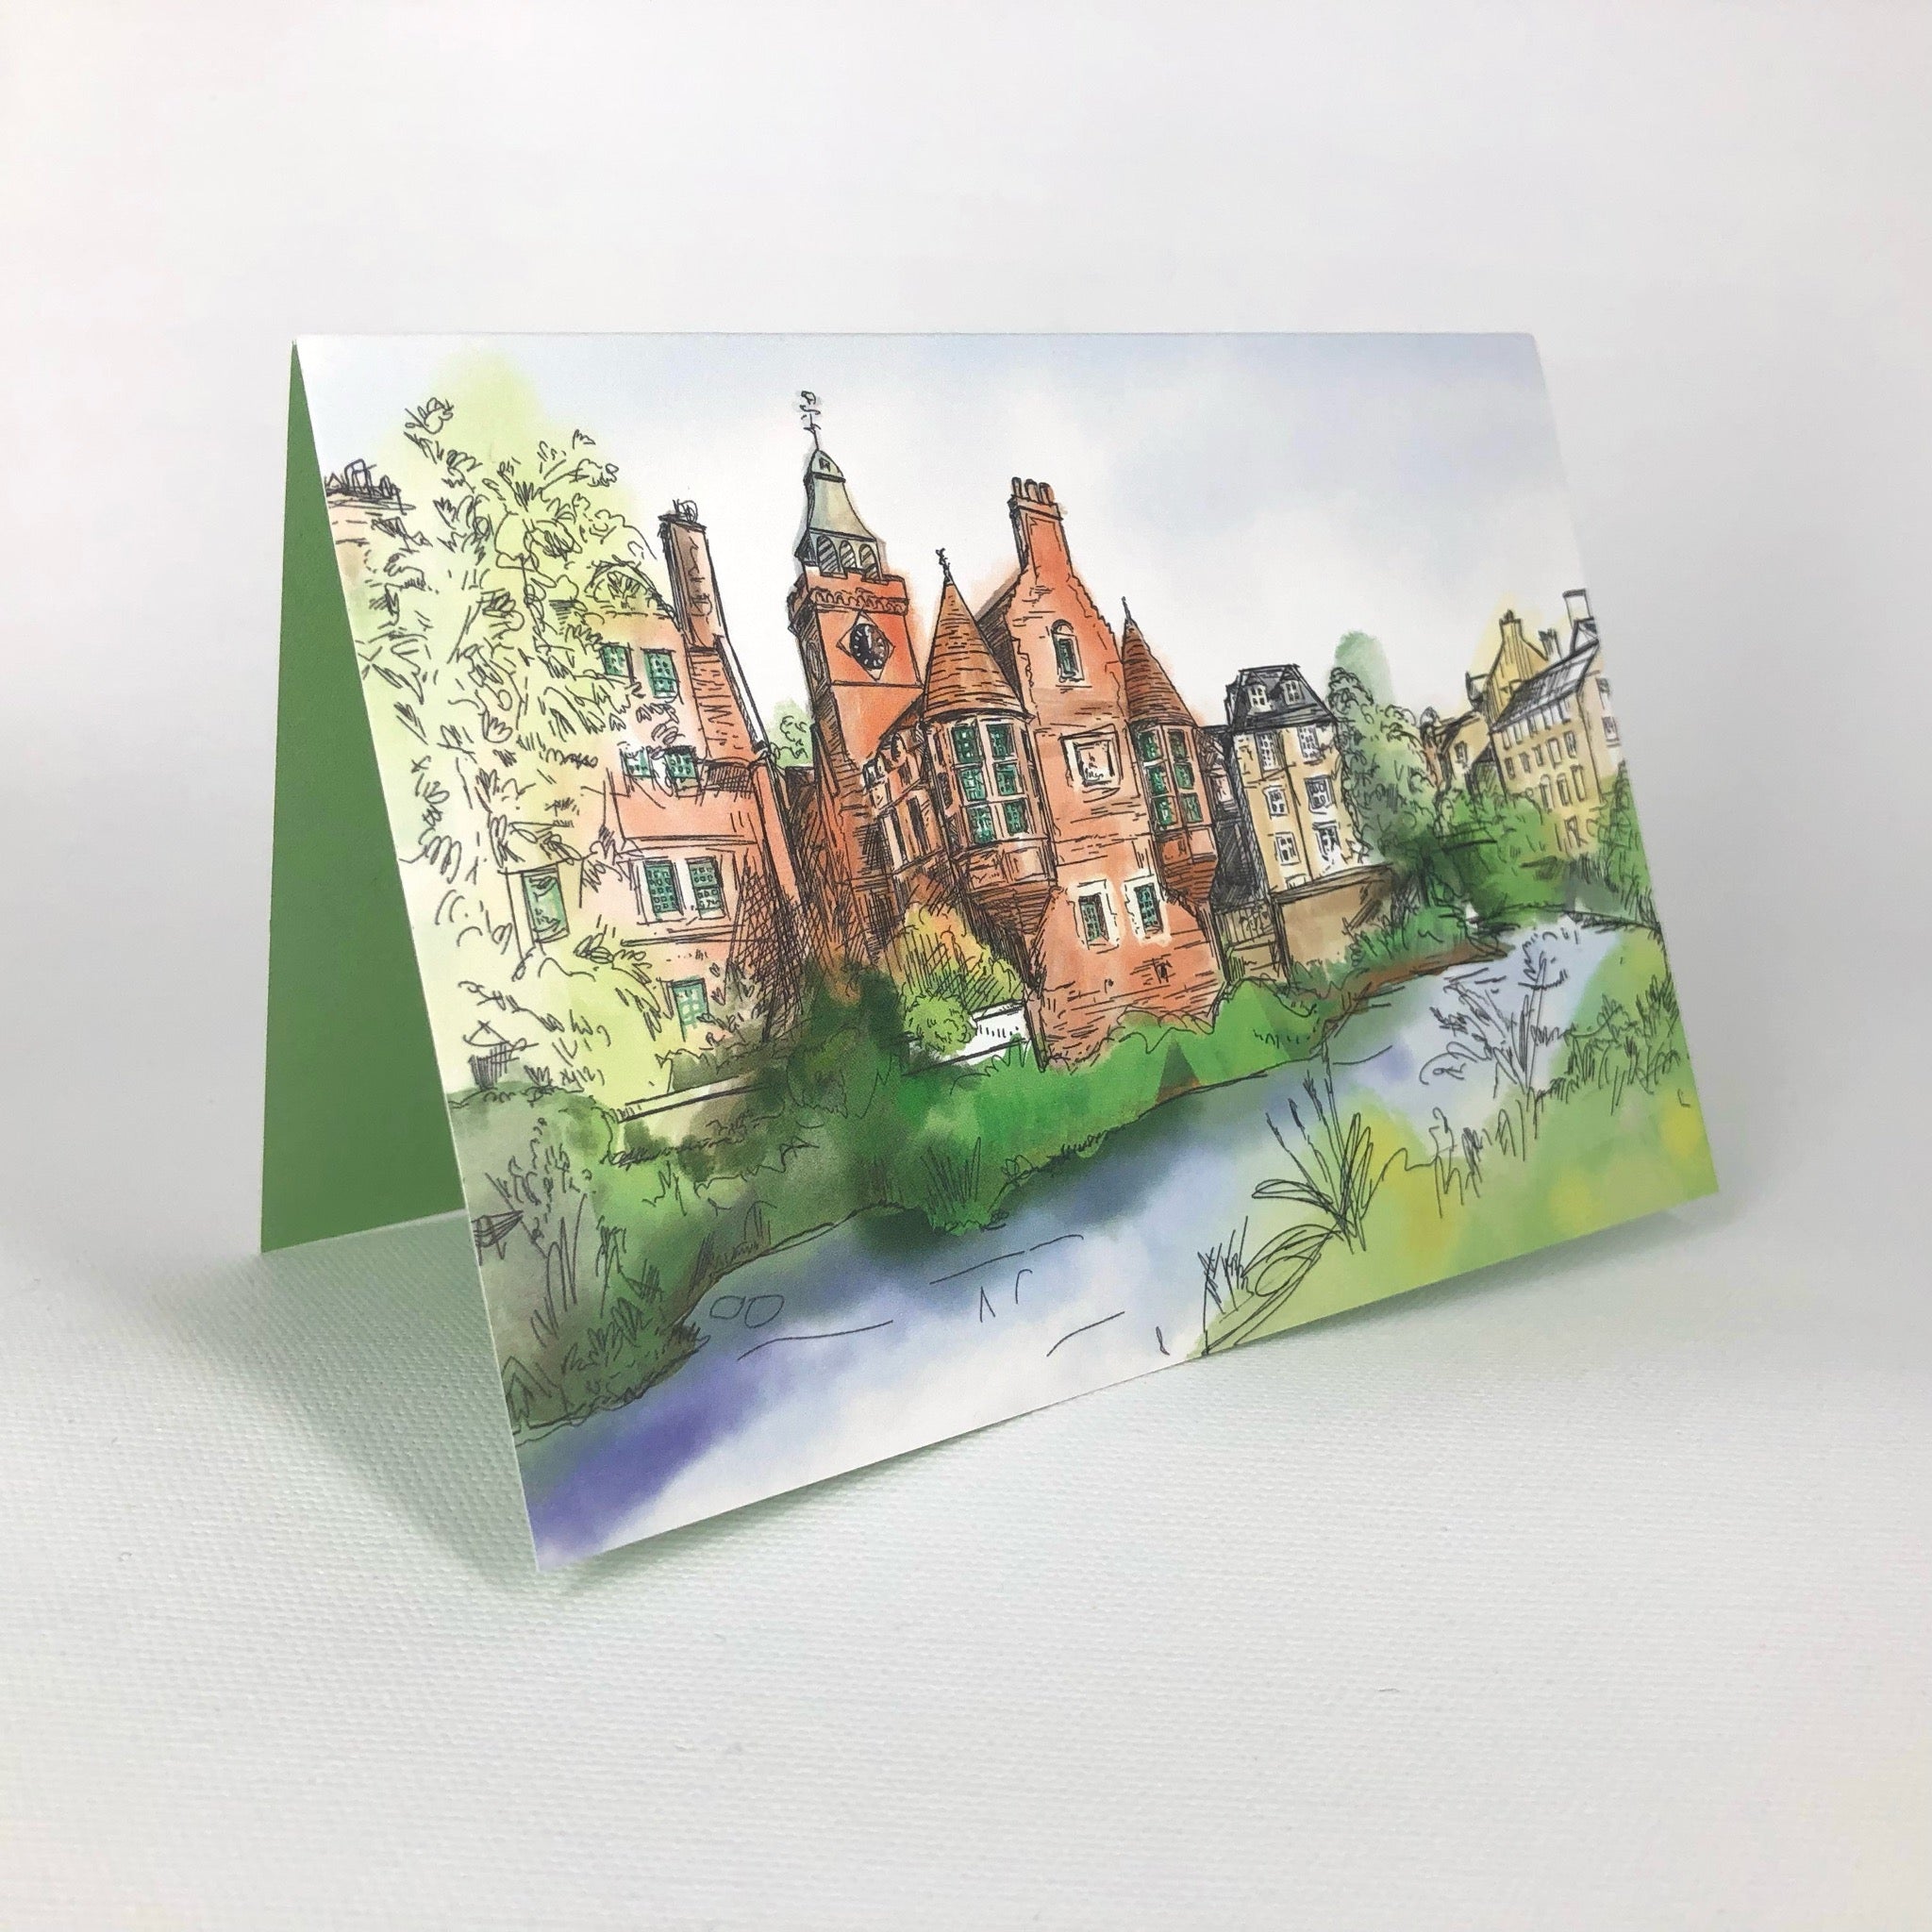 Water of Leith & Dean Village Greeting Card